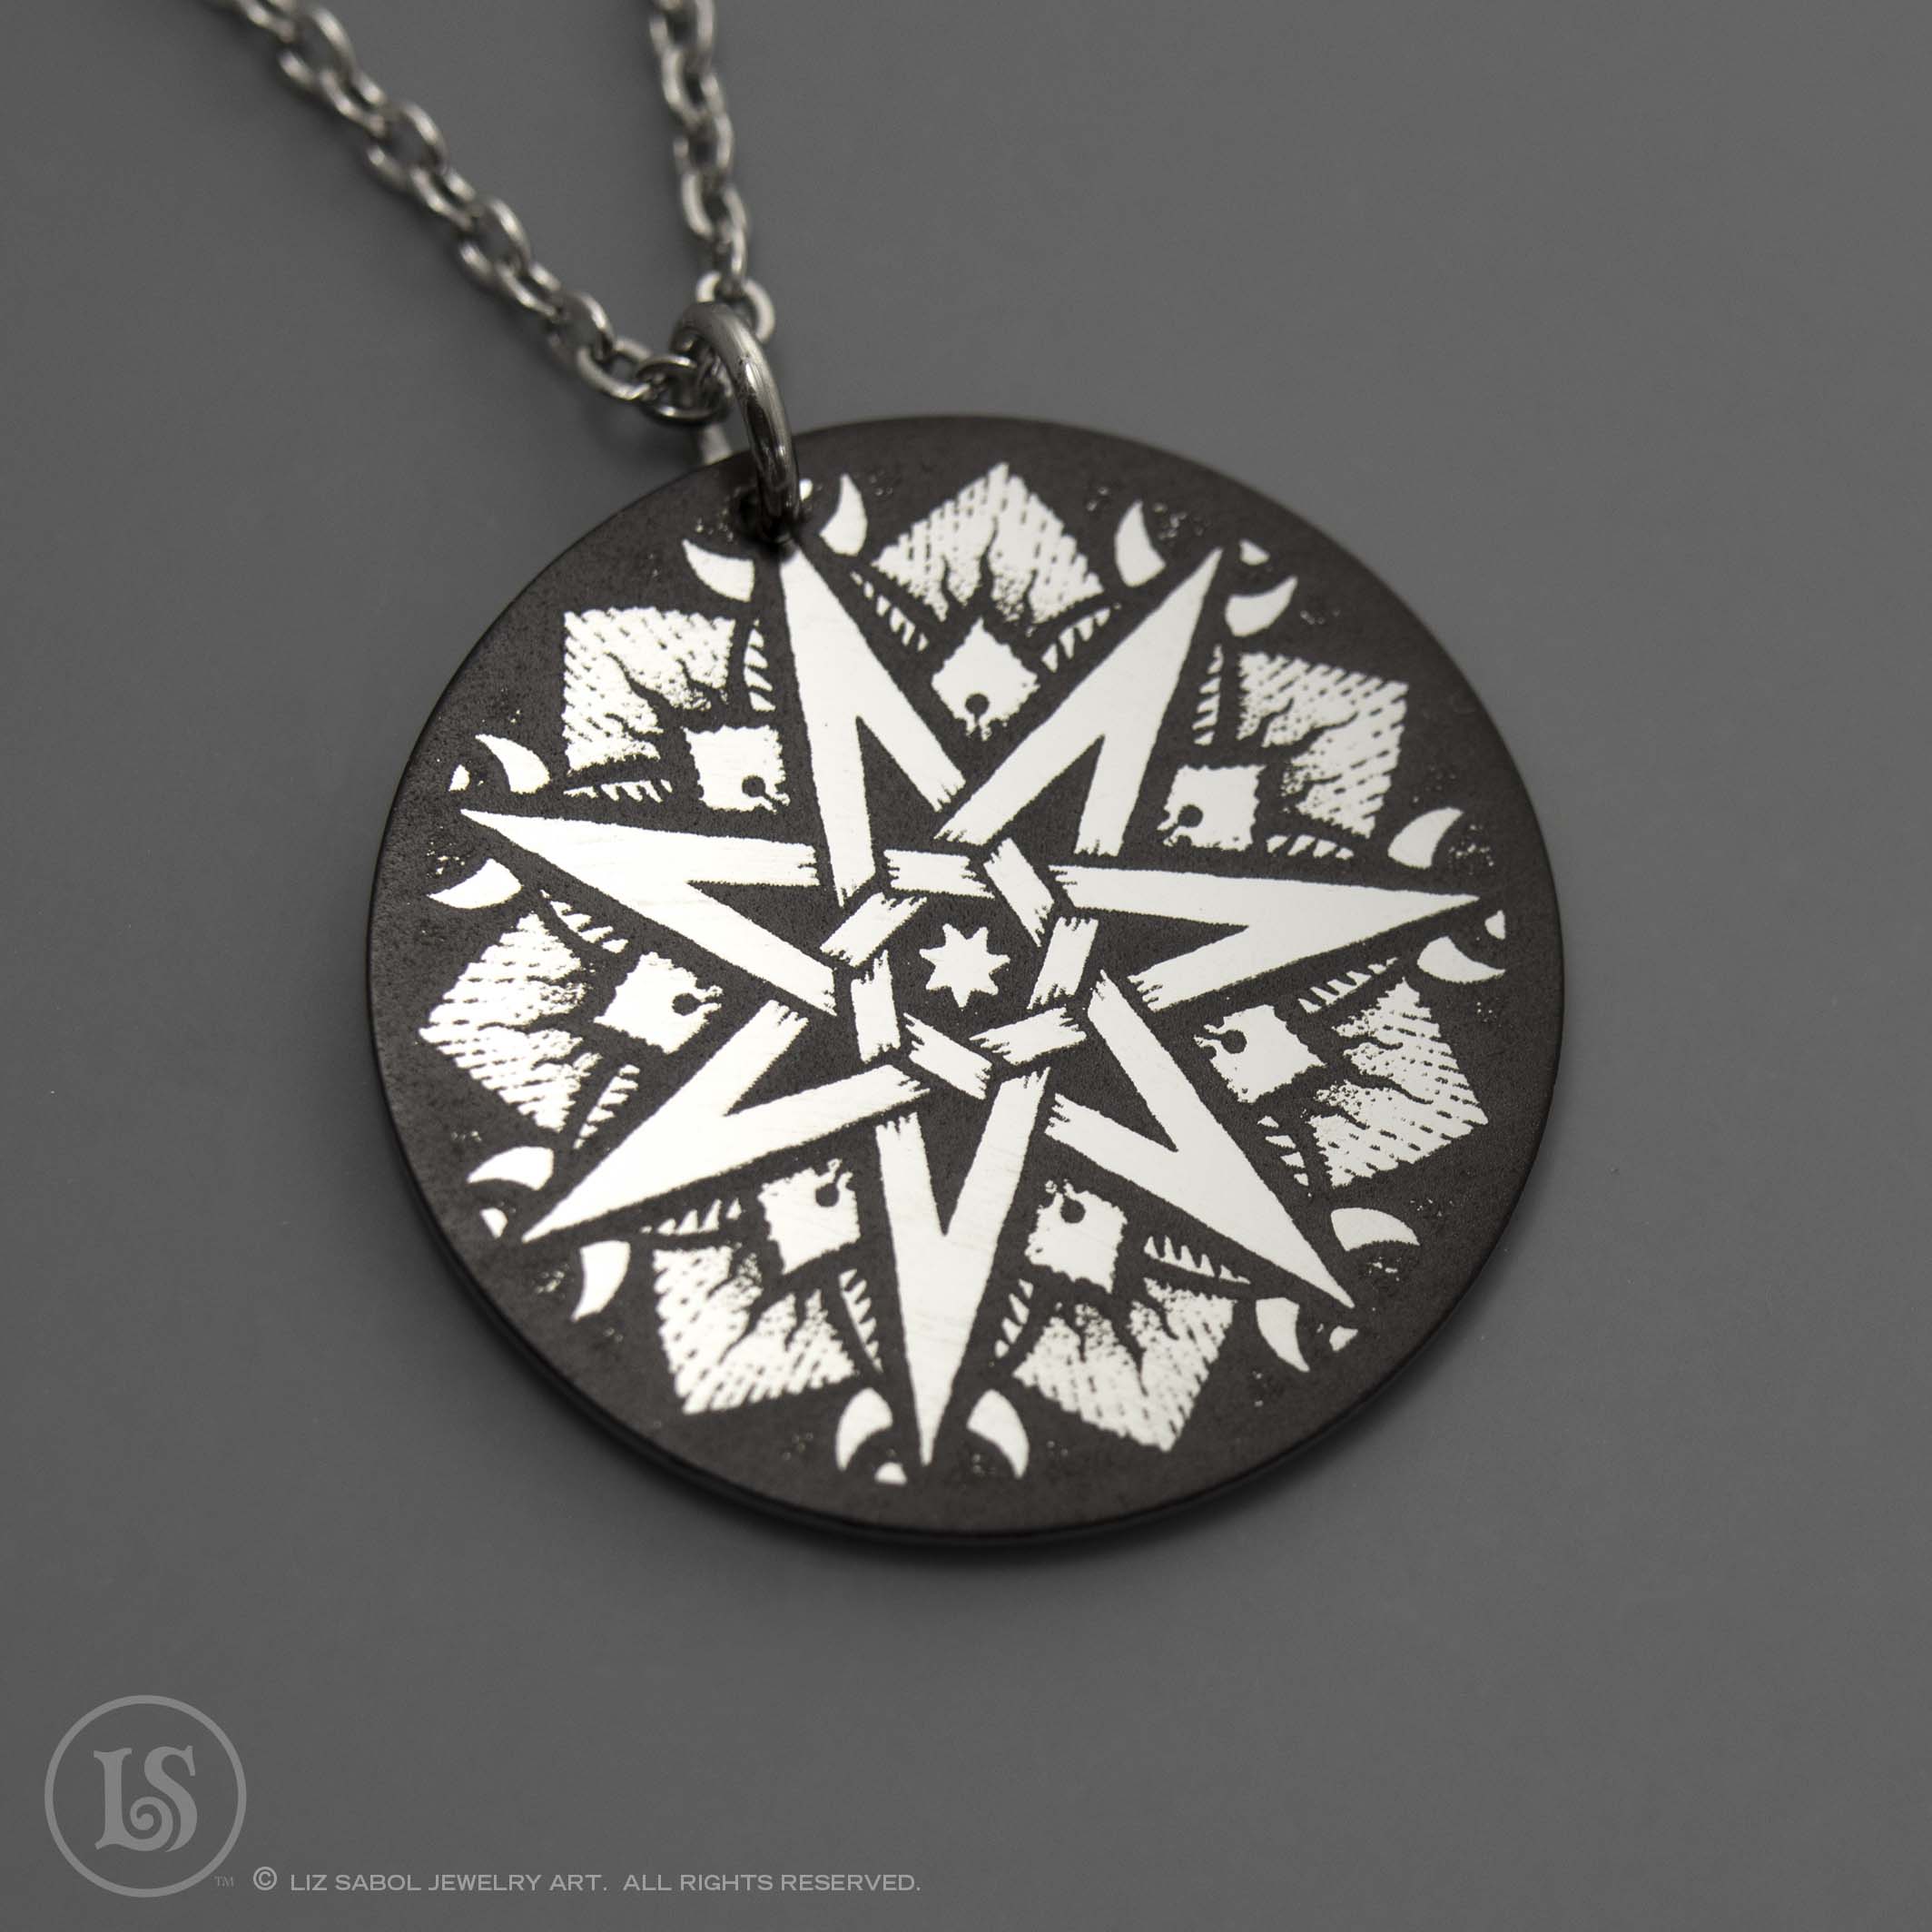 Septagram Etched Pendant, Stainless Steel